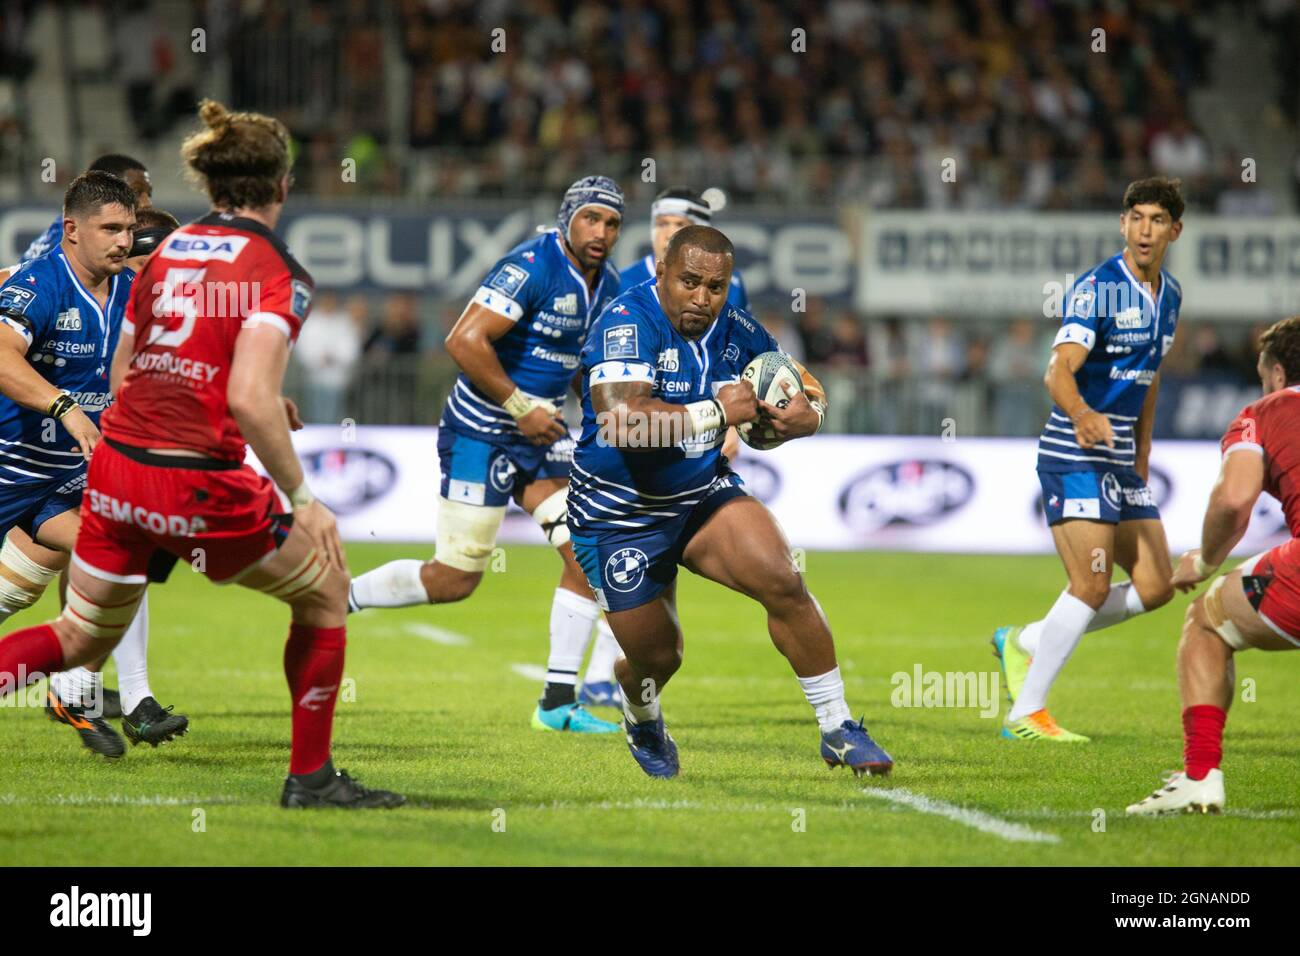 Pagakalasio Tafili during the French championship Pro D2 Rugby Union match  between RC Vannes and Oyonnax Rugby on September 23, 2021 at La Rabine  stadium in Vannes, France - Photo Damien Kilani /